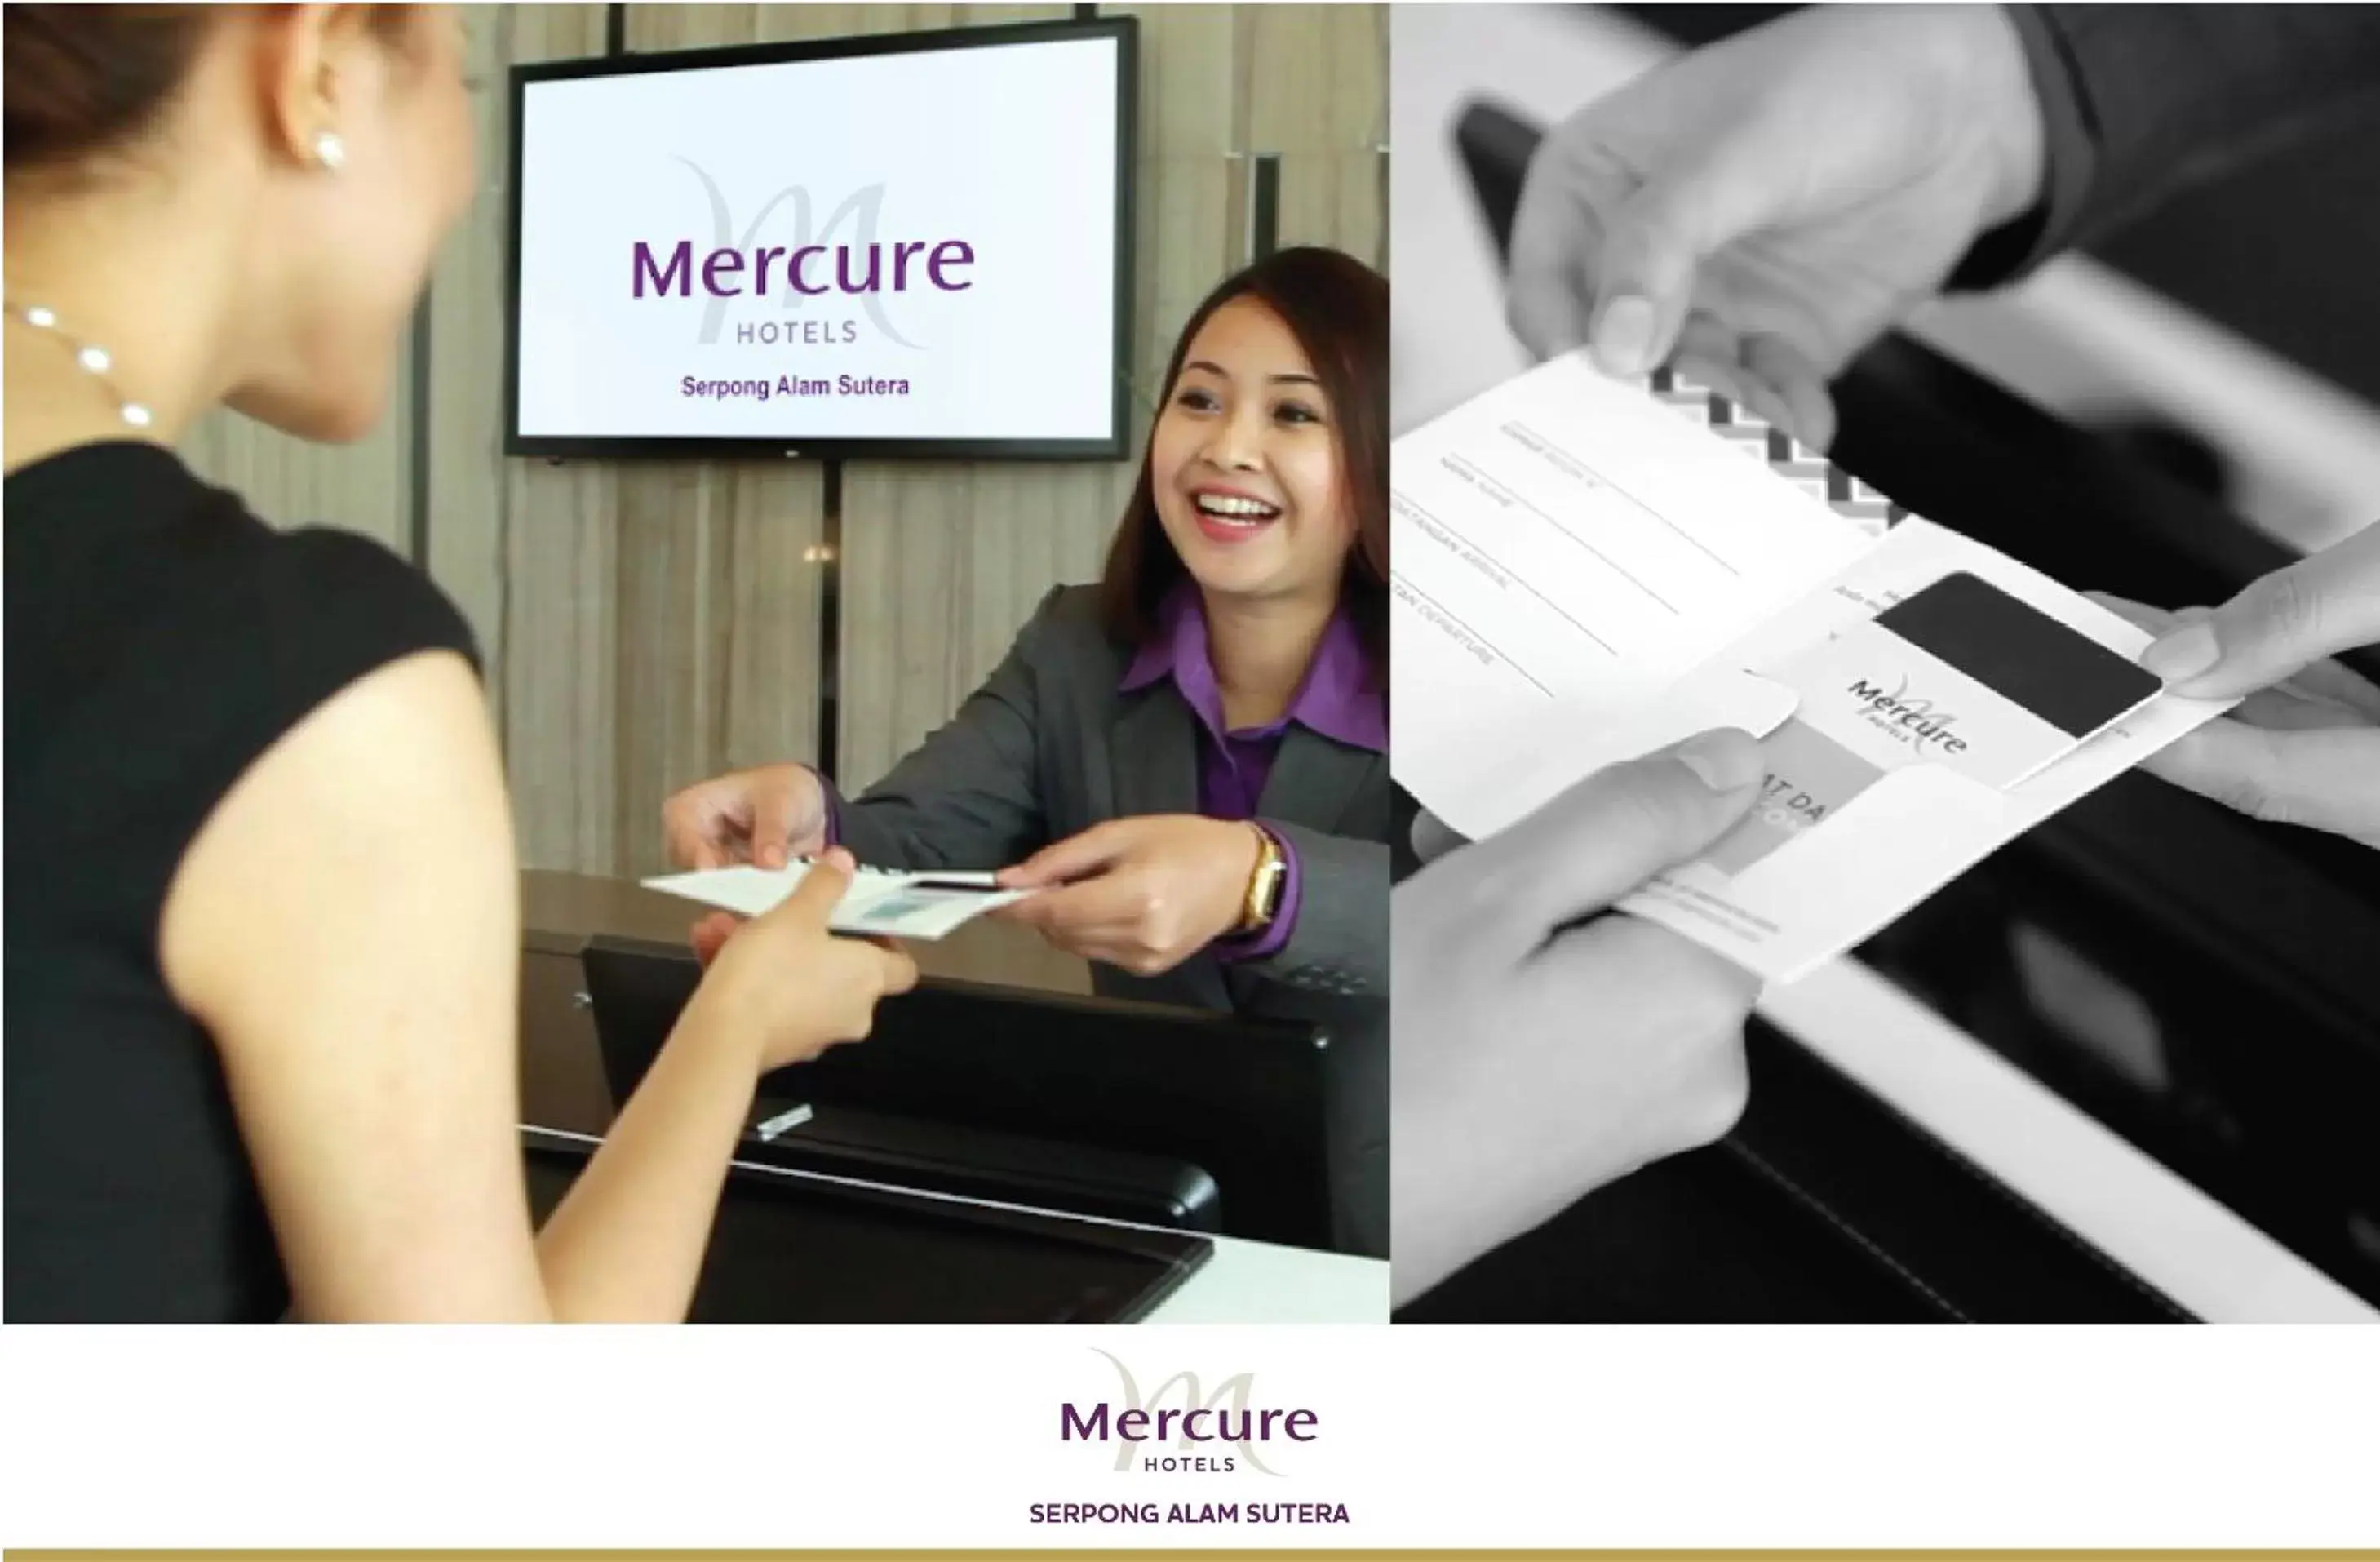 Other, Staff in Mercure Serpong Alam Sutera